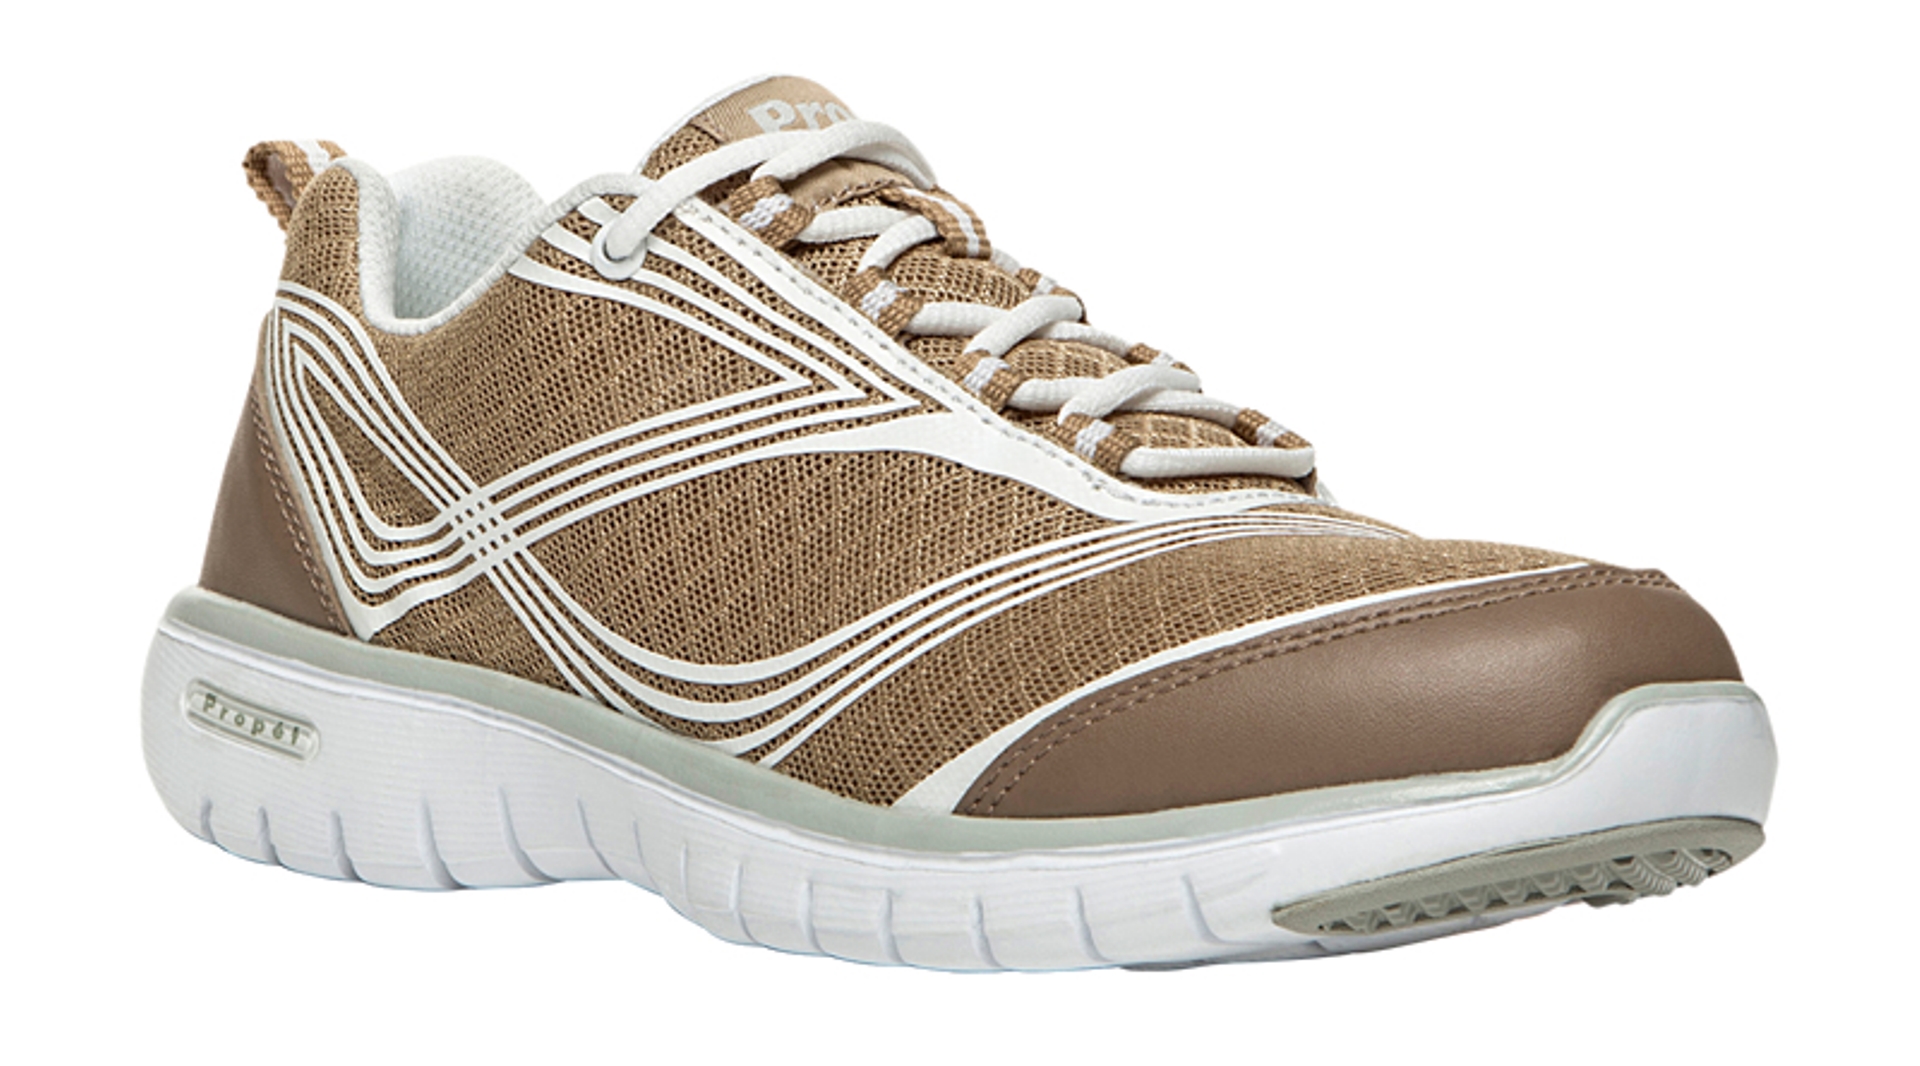 Propet Women's TravelLite Taupe Sneaker - Wide Widths Available